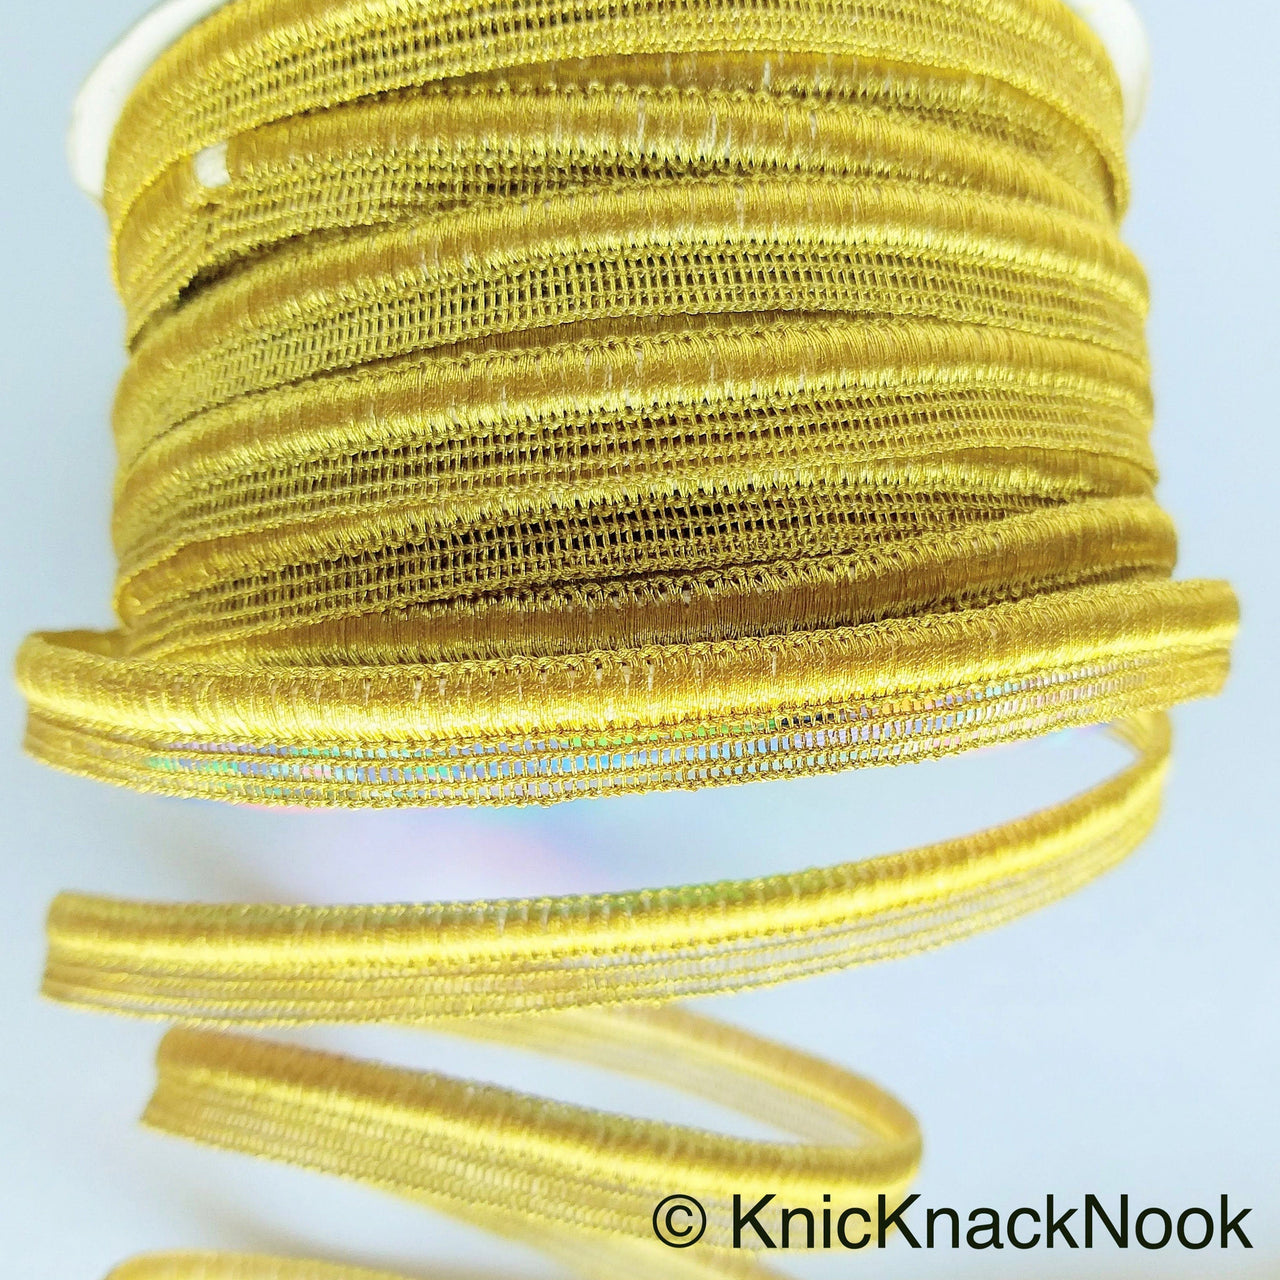 Antique Gold / Light Gold / Silver Lace Trim With Glitter Piping, Fringe Trim, Approx. 10 mm wide - 210119L83/84/85